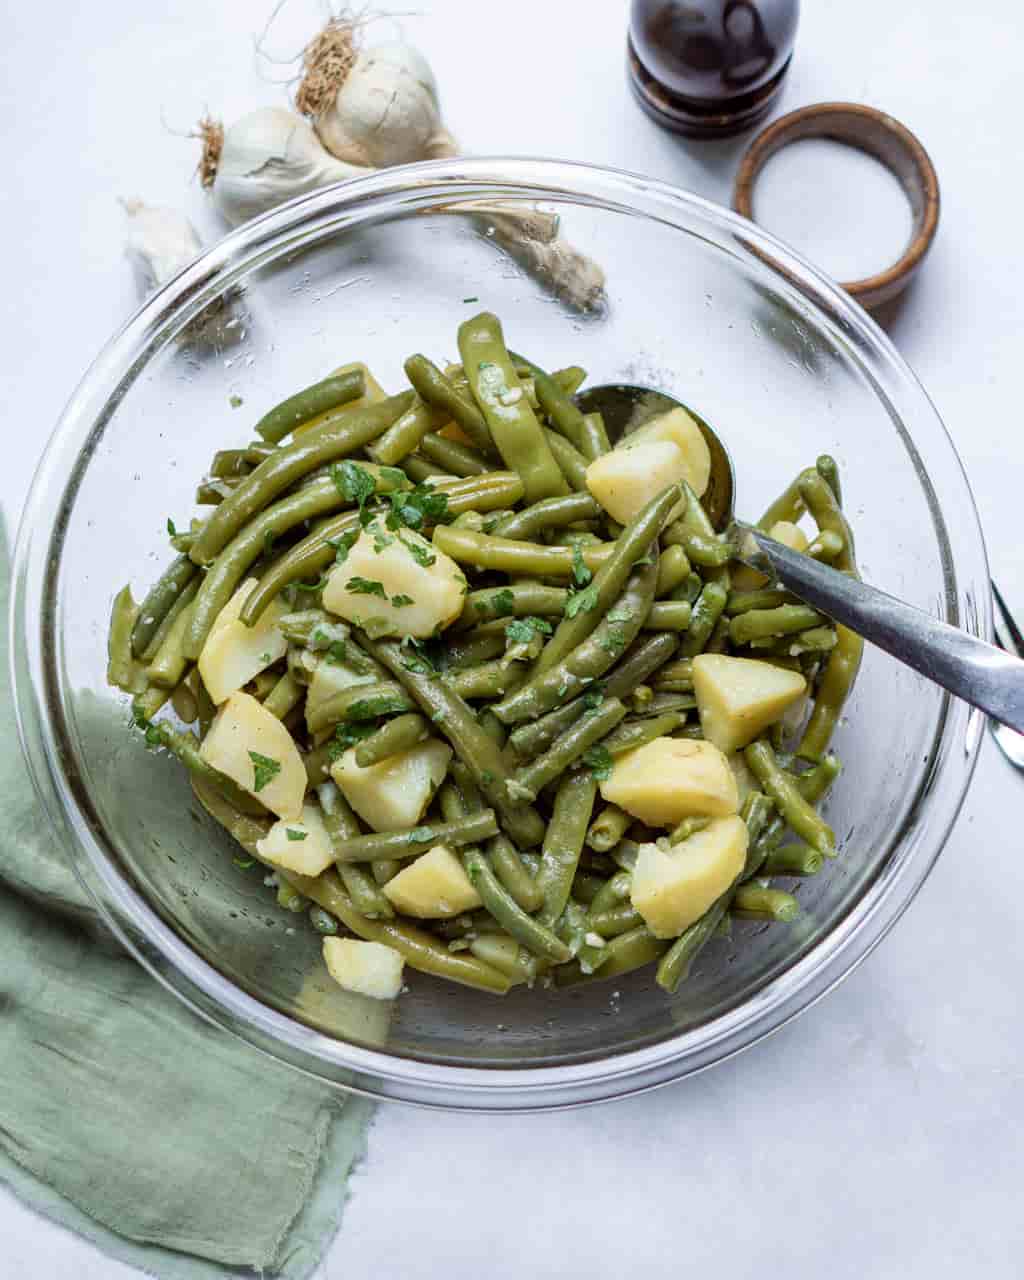 Green Beans and potatoes in a bowl with a spoon